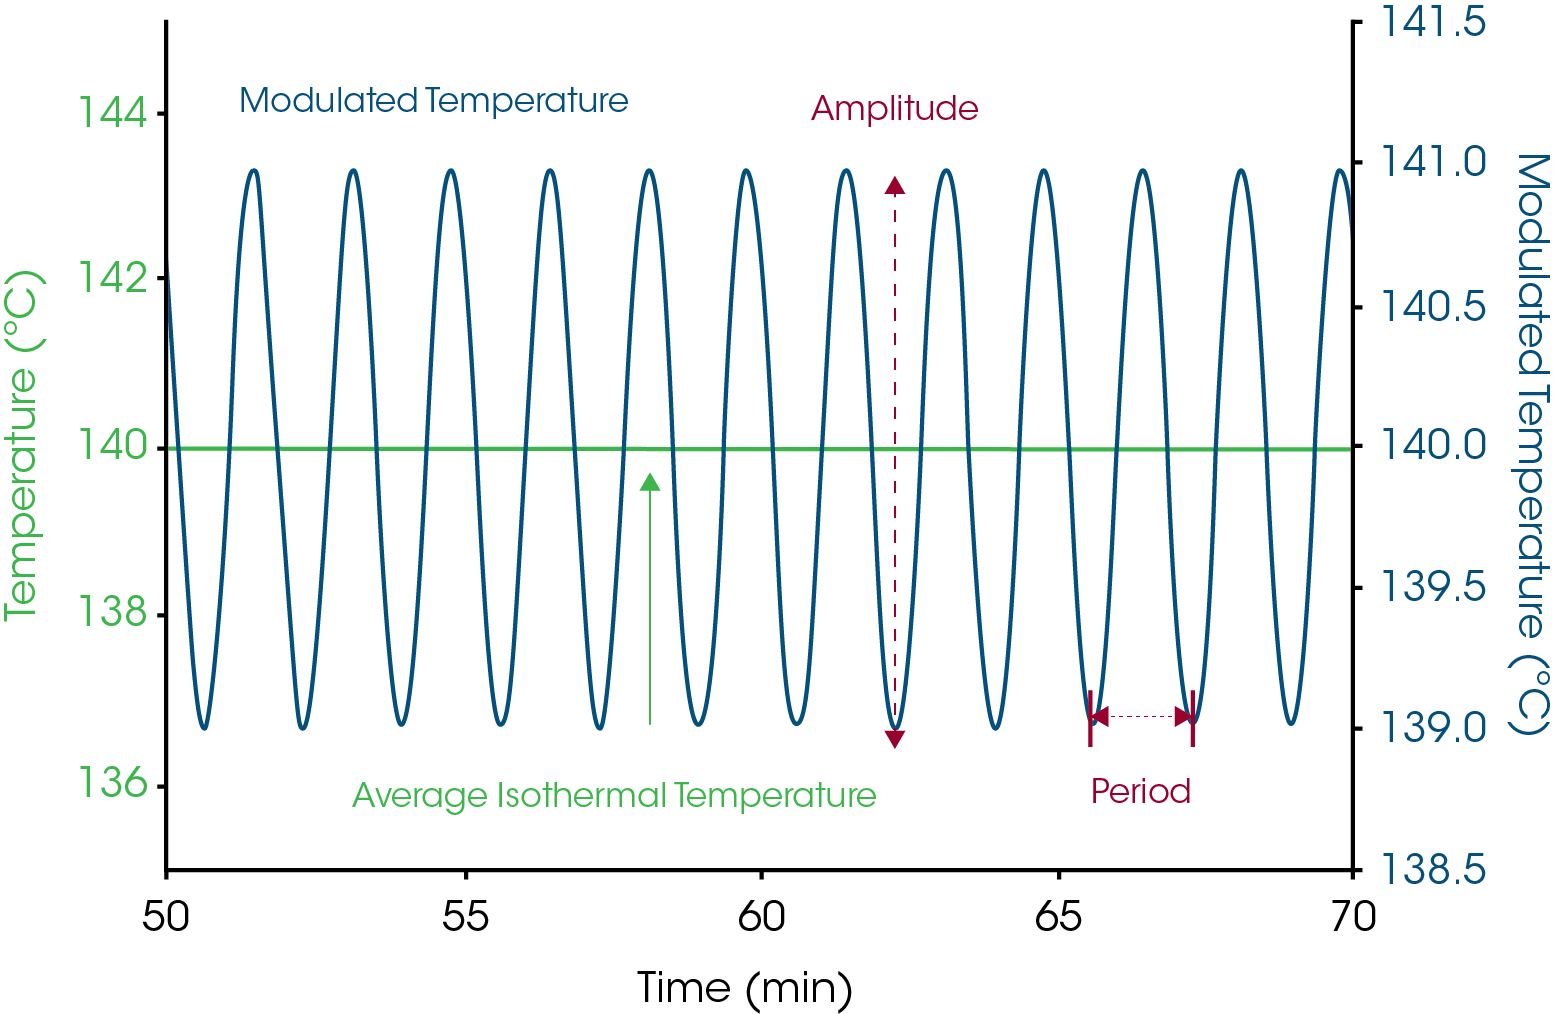 Figure 10: Illustration of how MDSC® can apply a temperature modulation at the same time as the average temperature is held constant (isothermal). The modulated temperature permits the measurement of heat capacity vs. time at an isothermal temperature. Typical MDSC conditions are ±1.0°C every 100 seconds. Standard DSC does not have the ability to measure heat capacity under isothermal conditions.